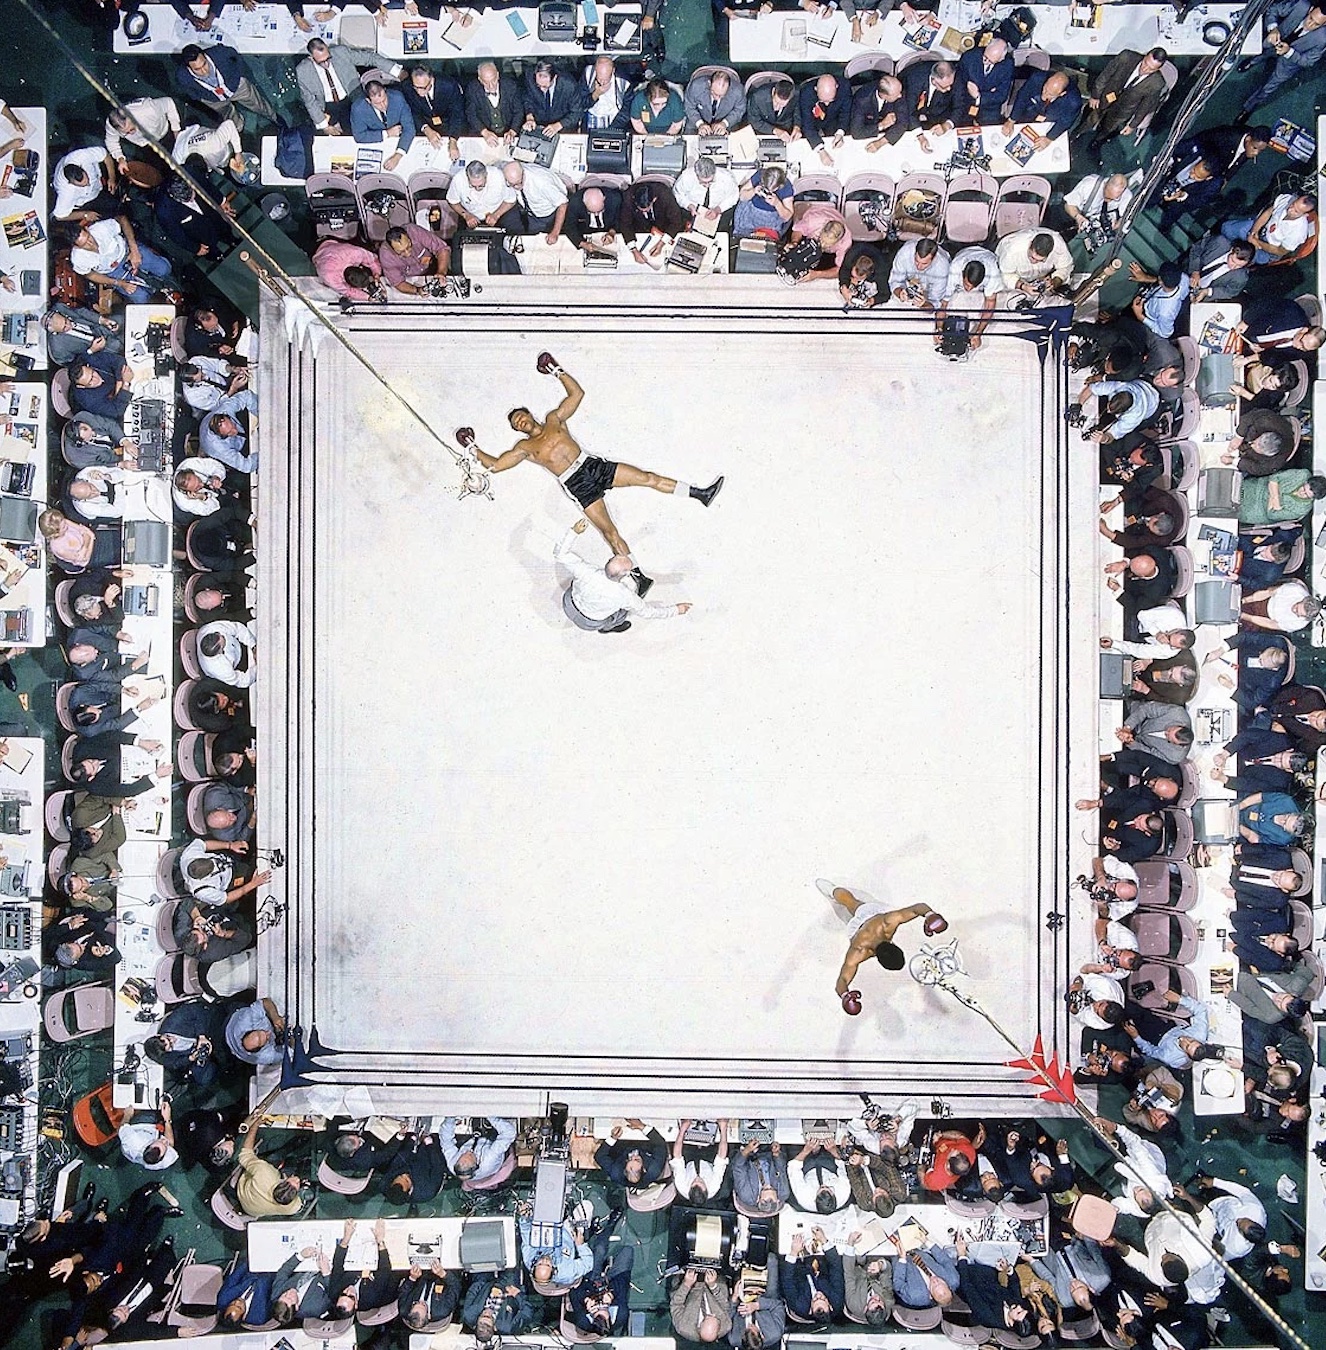 Most iconic fascinating sports photos - greatest sports pictures of all time